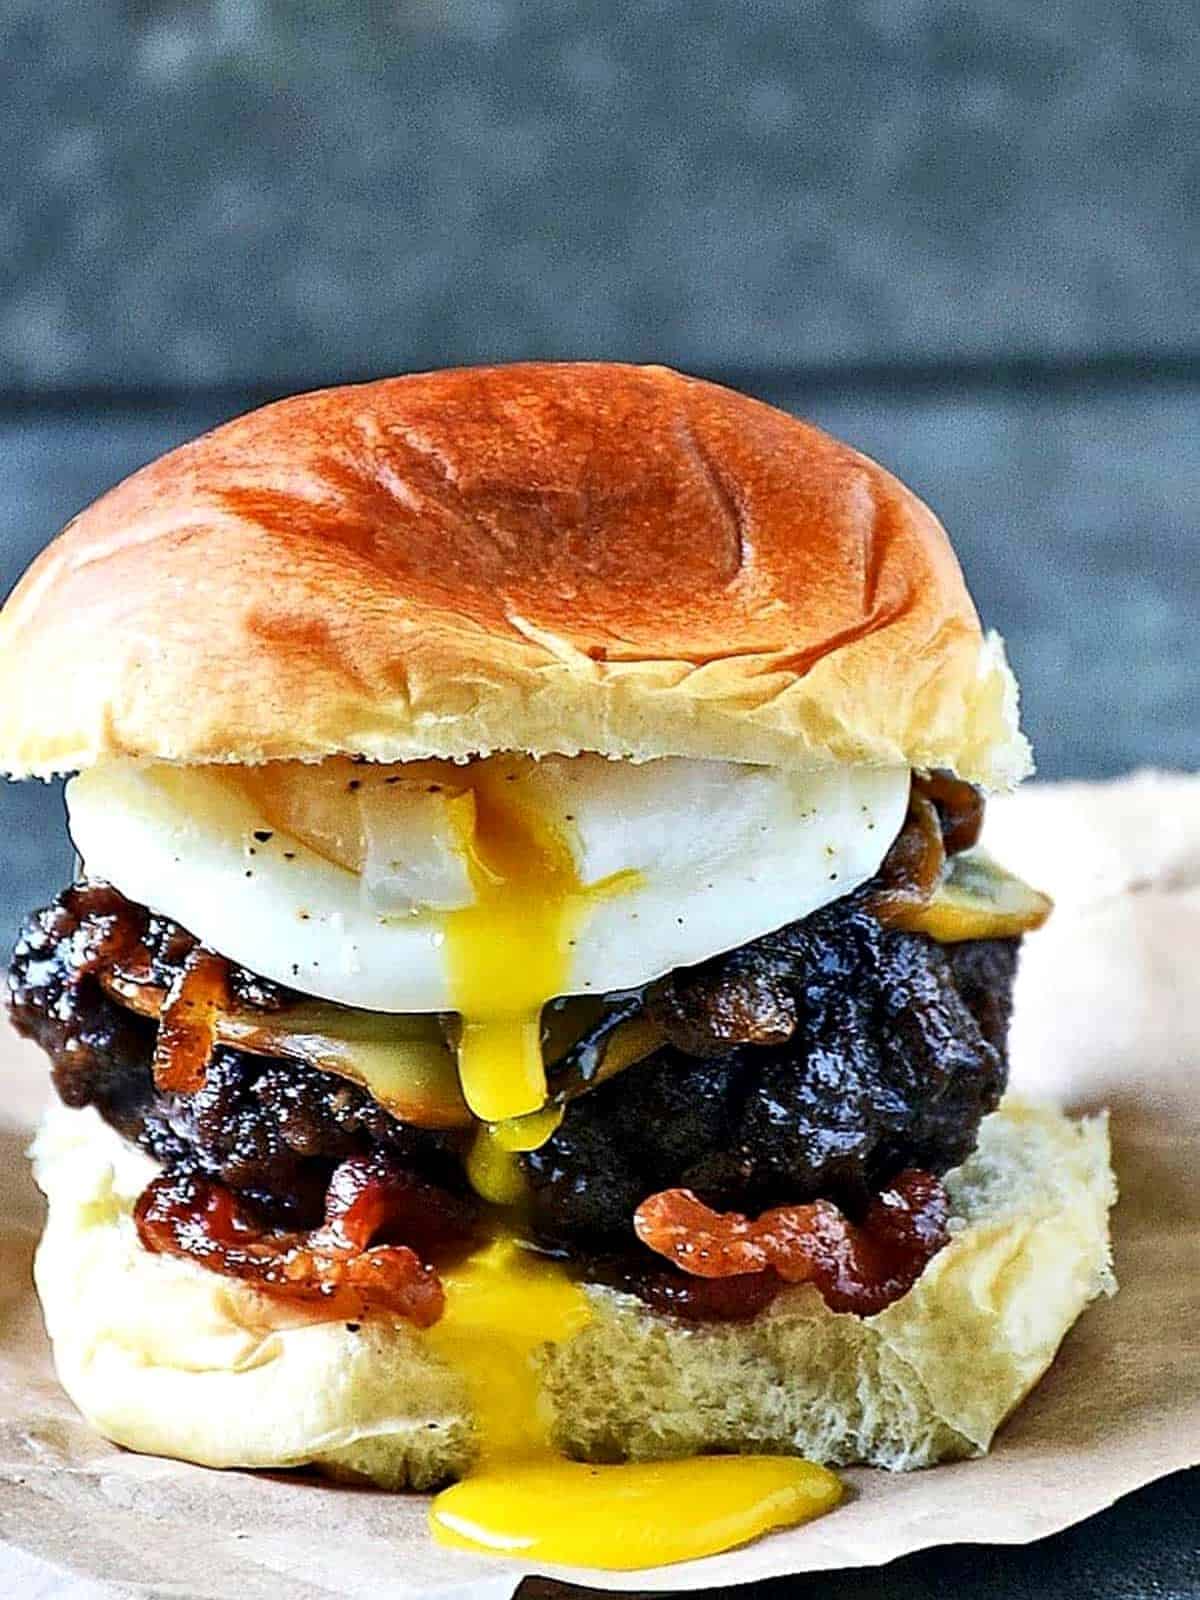 Burger with a bun, onions and a runny egg.